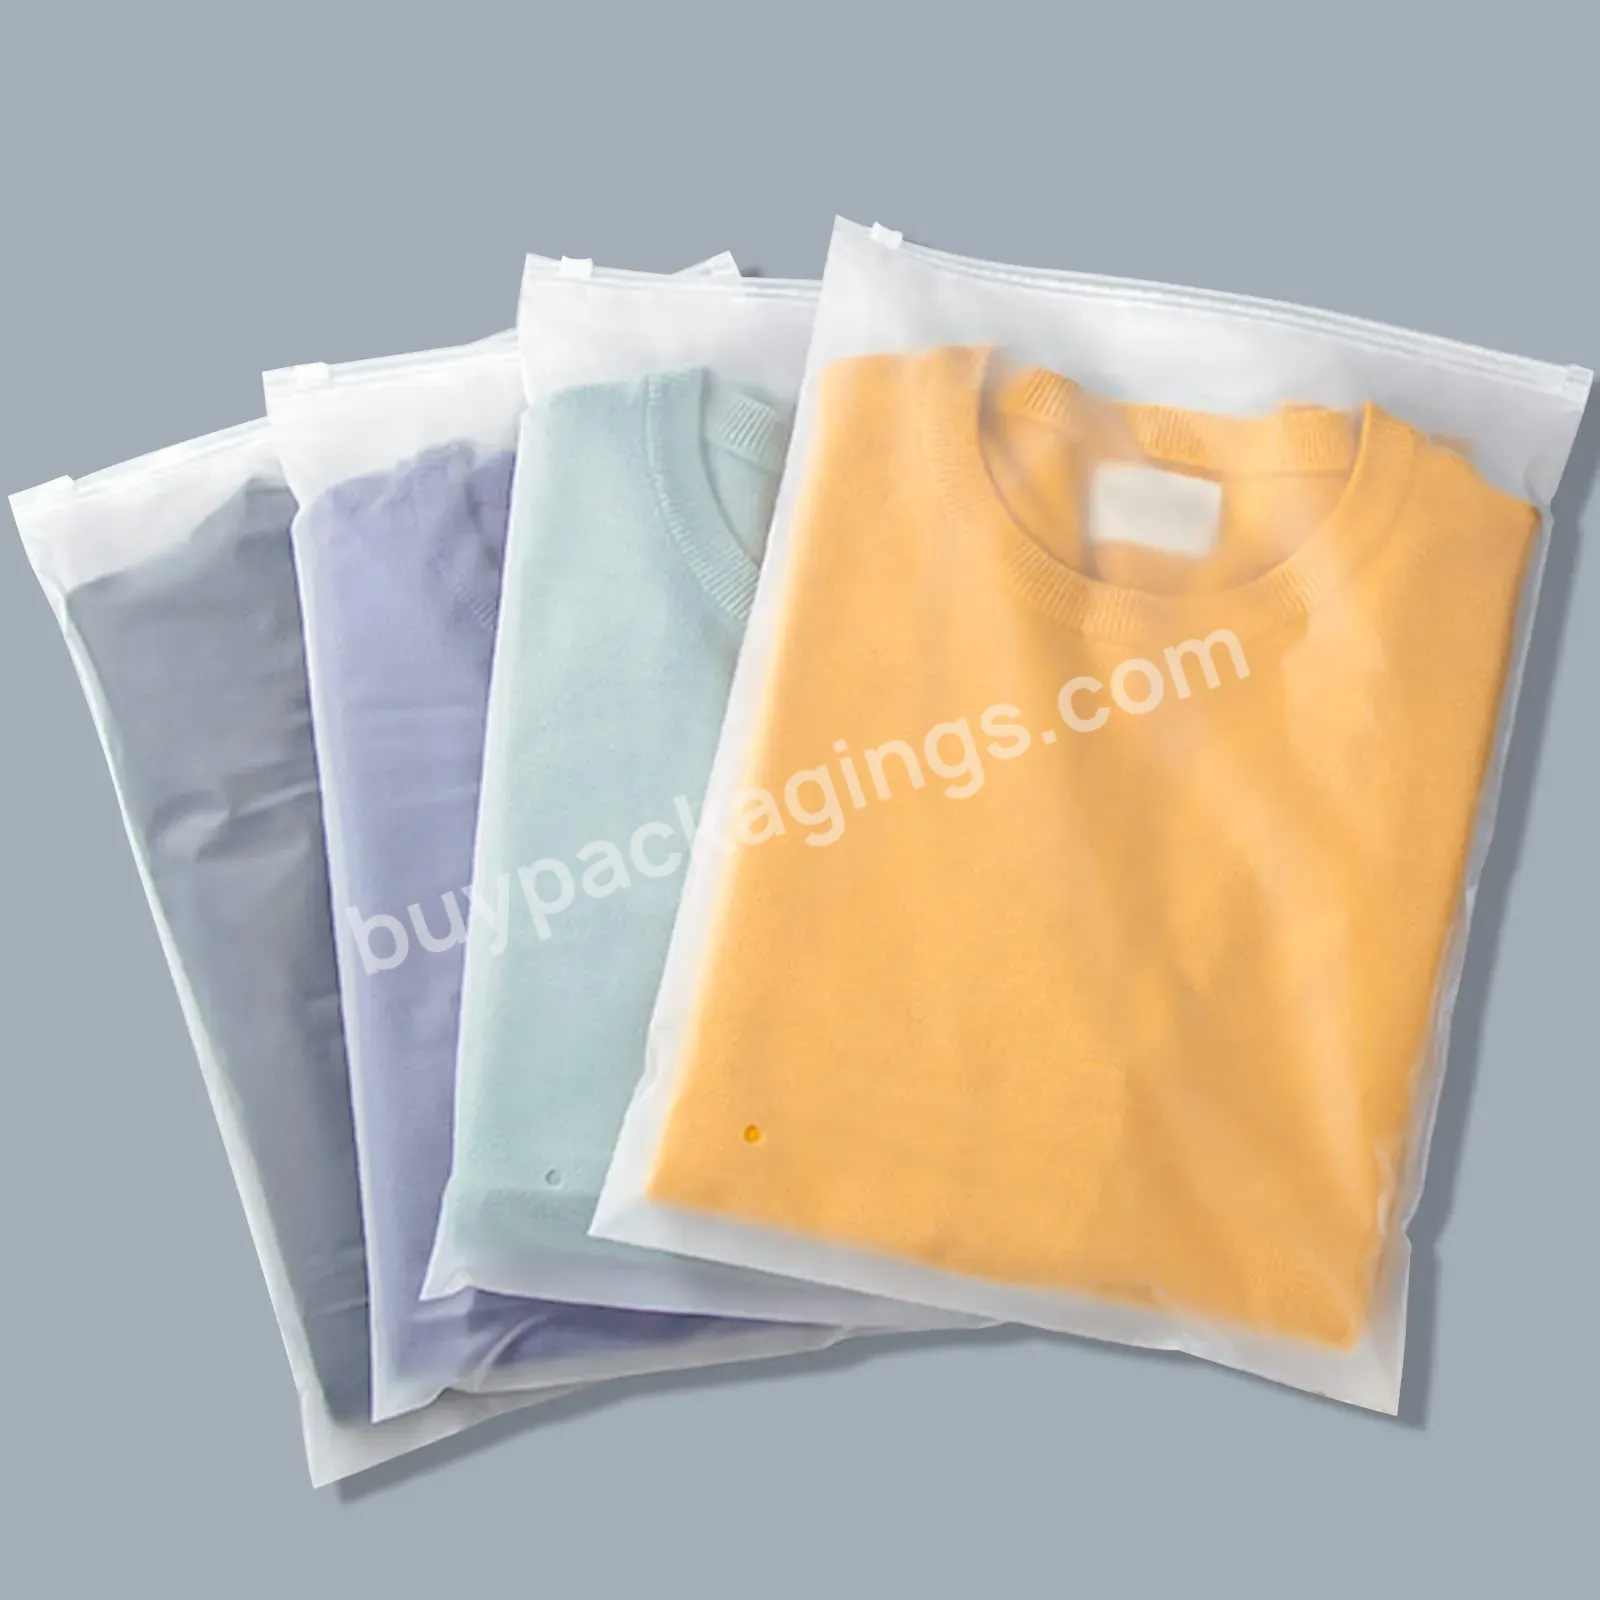 Translucent 13x21cm Plastic Pouches Frosted Plastic T Shirt Packaging Zipper Bag - Buy Translucent 13x21cm Plastic Pouches,Frosted Plastic T Shirt Packaging Zipper Bag,Clear Plastic Shirt Packaging Bags.